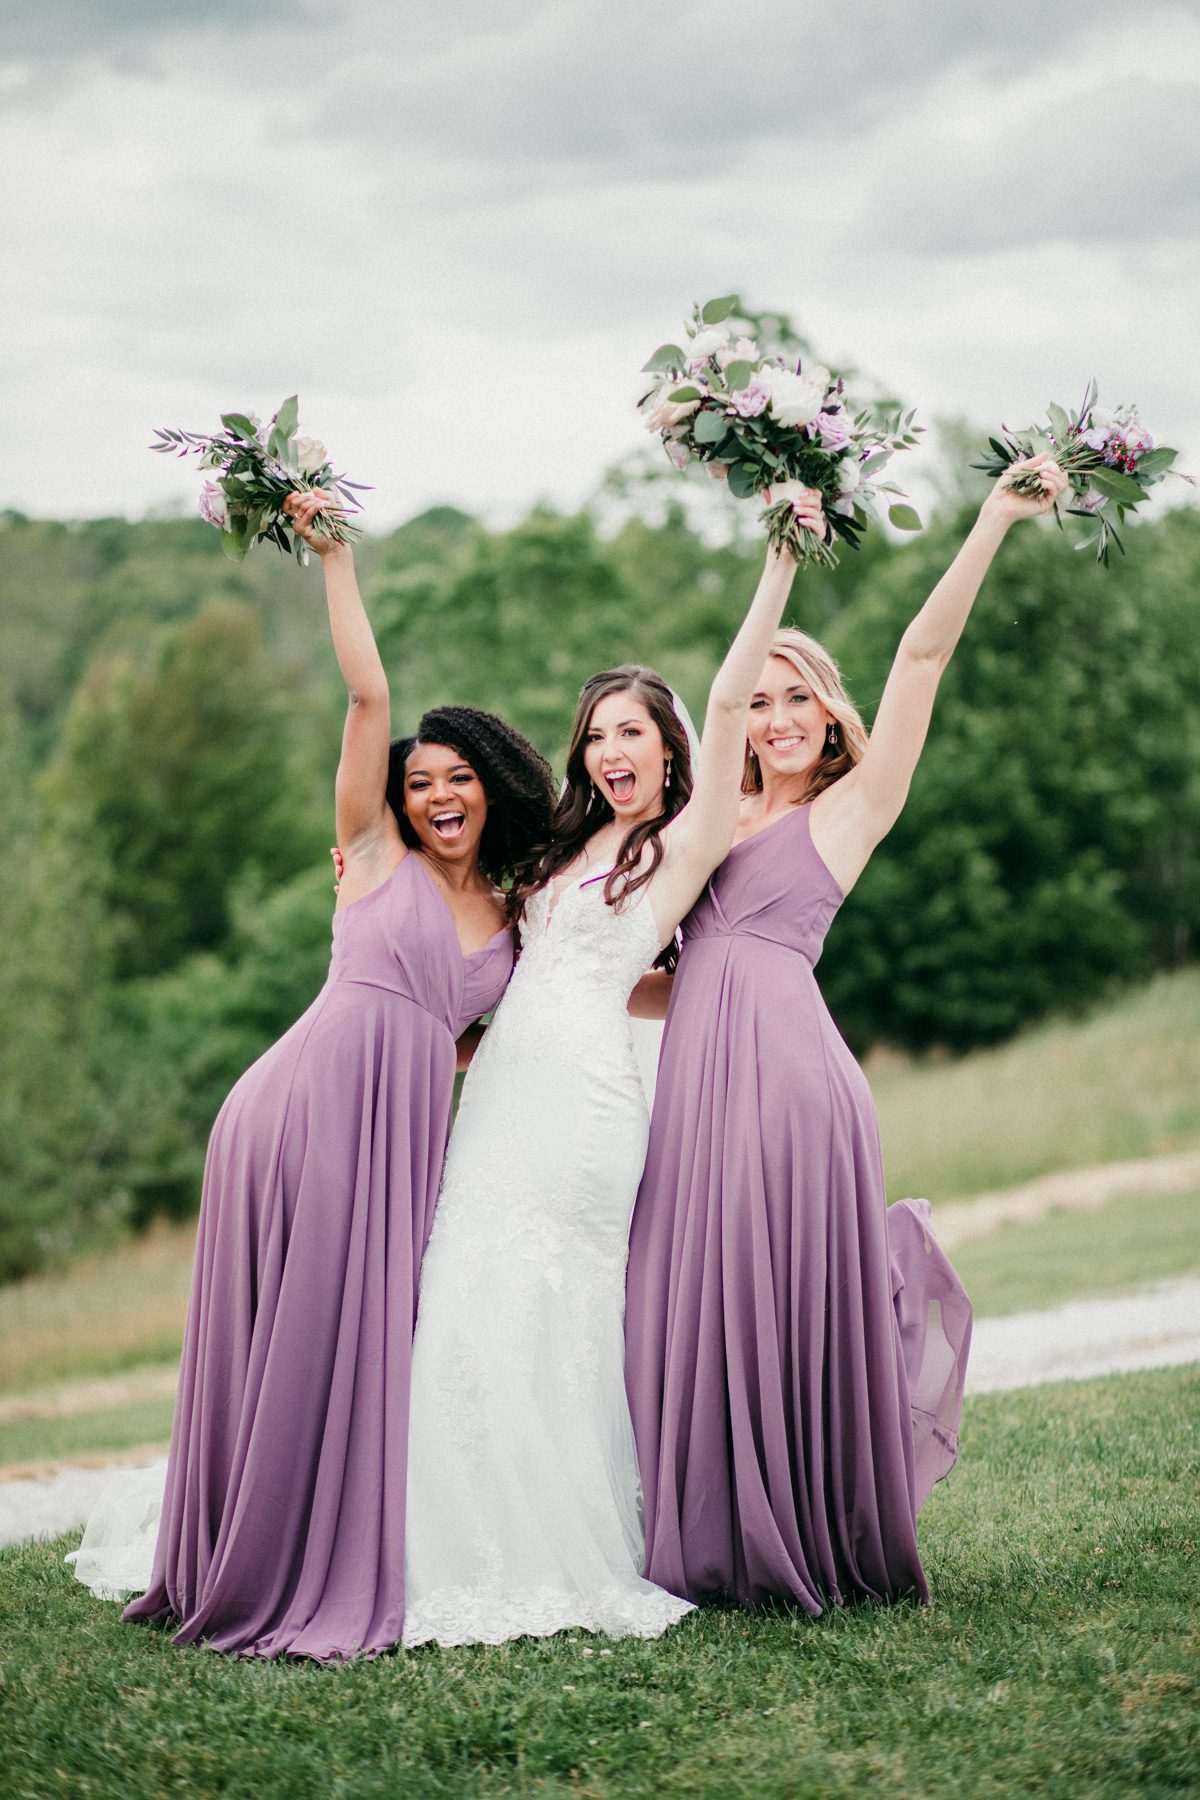 Bride with bridesmaids on wedding day 